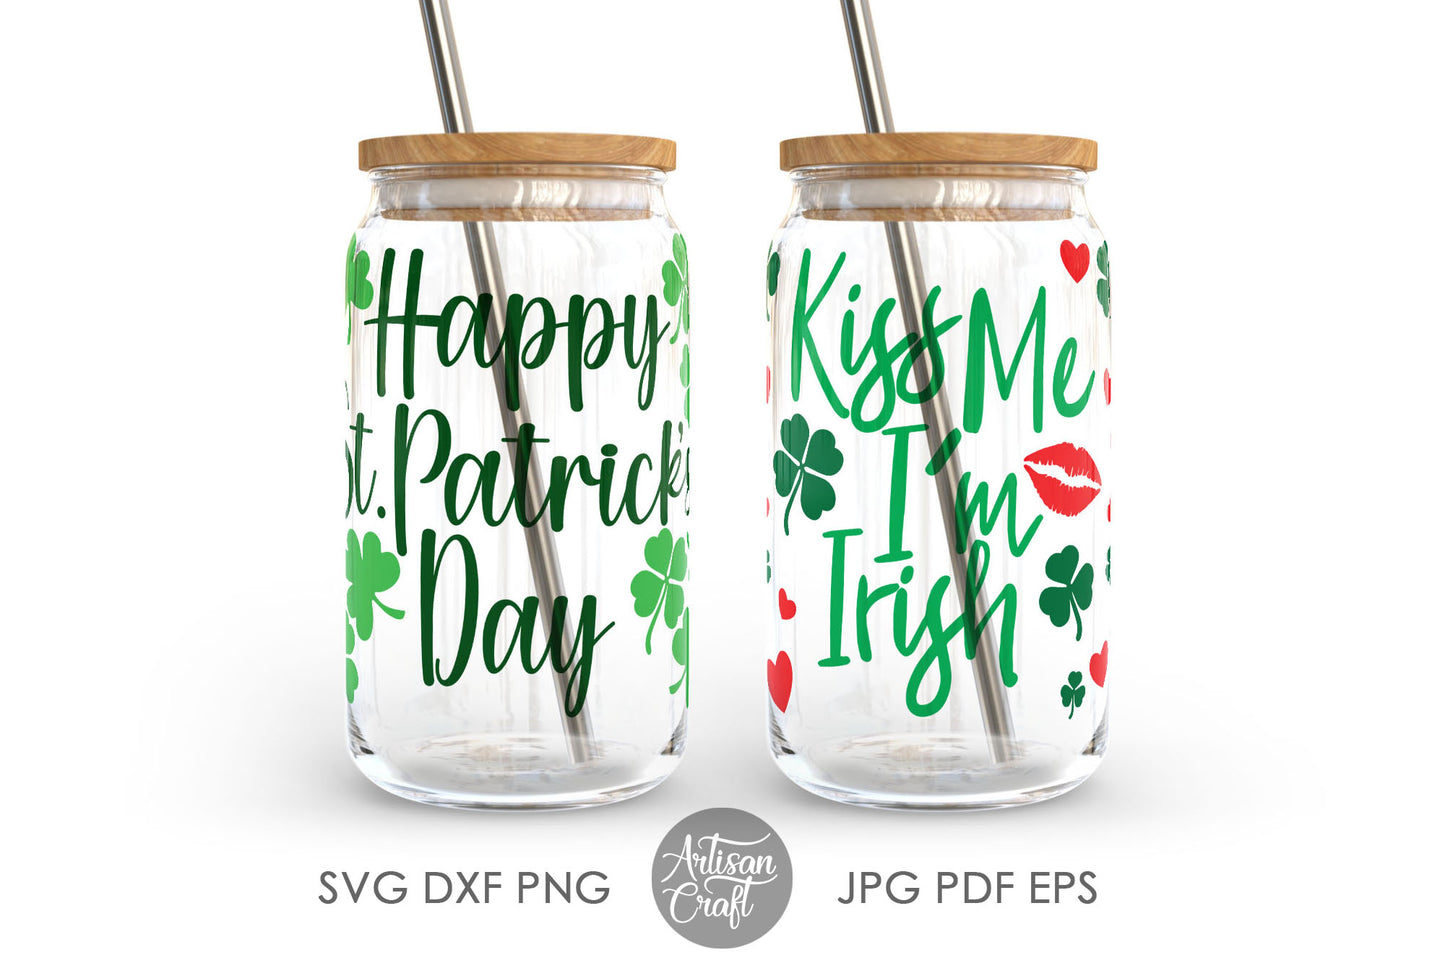 Can Glass SVG wrap for St Patricks Day